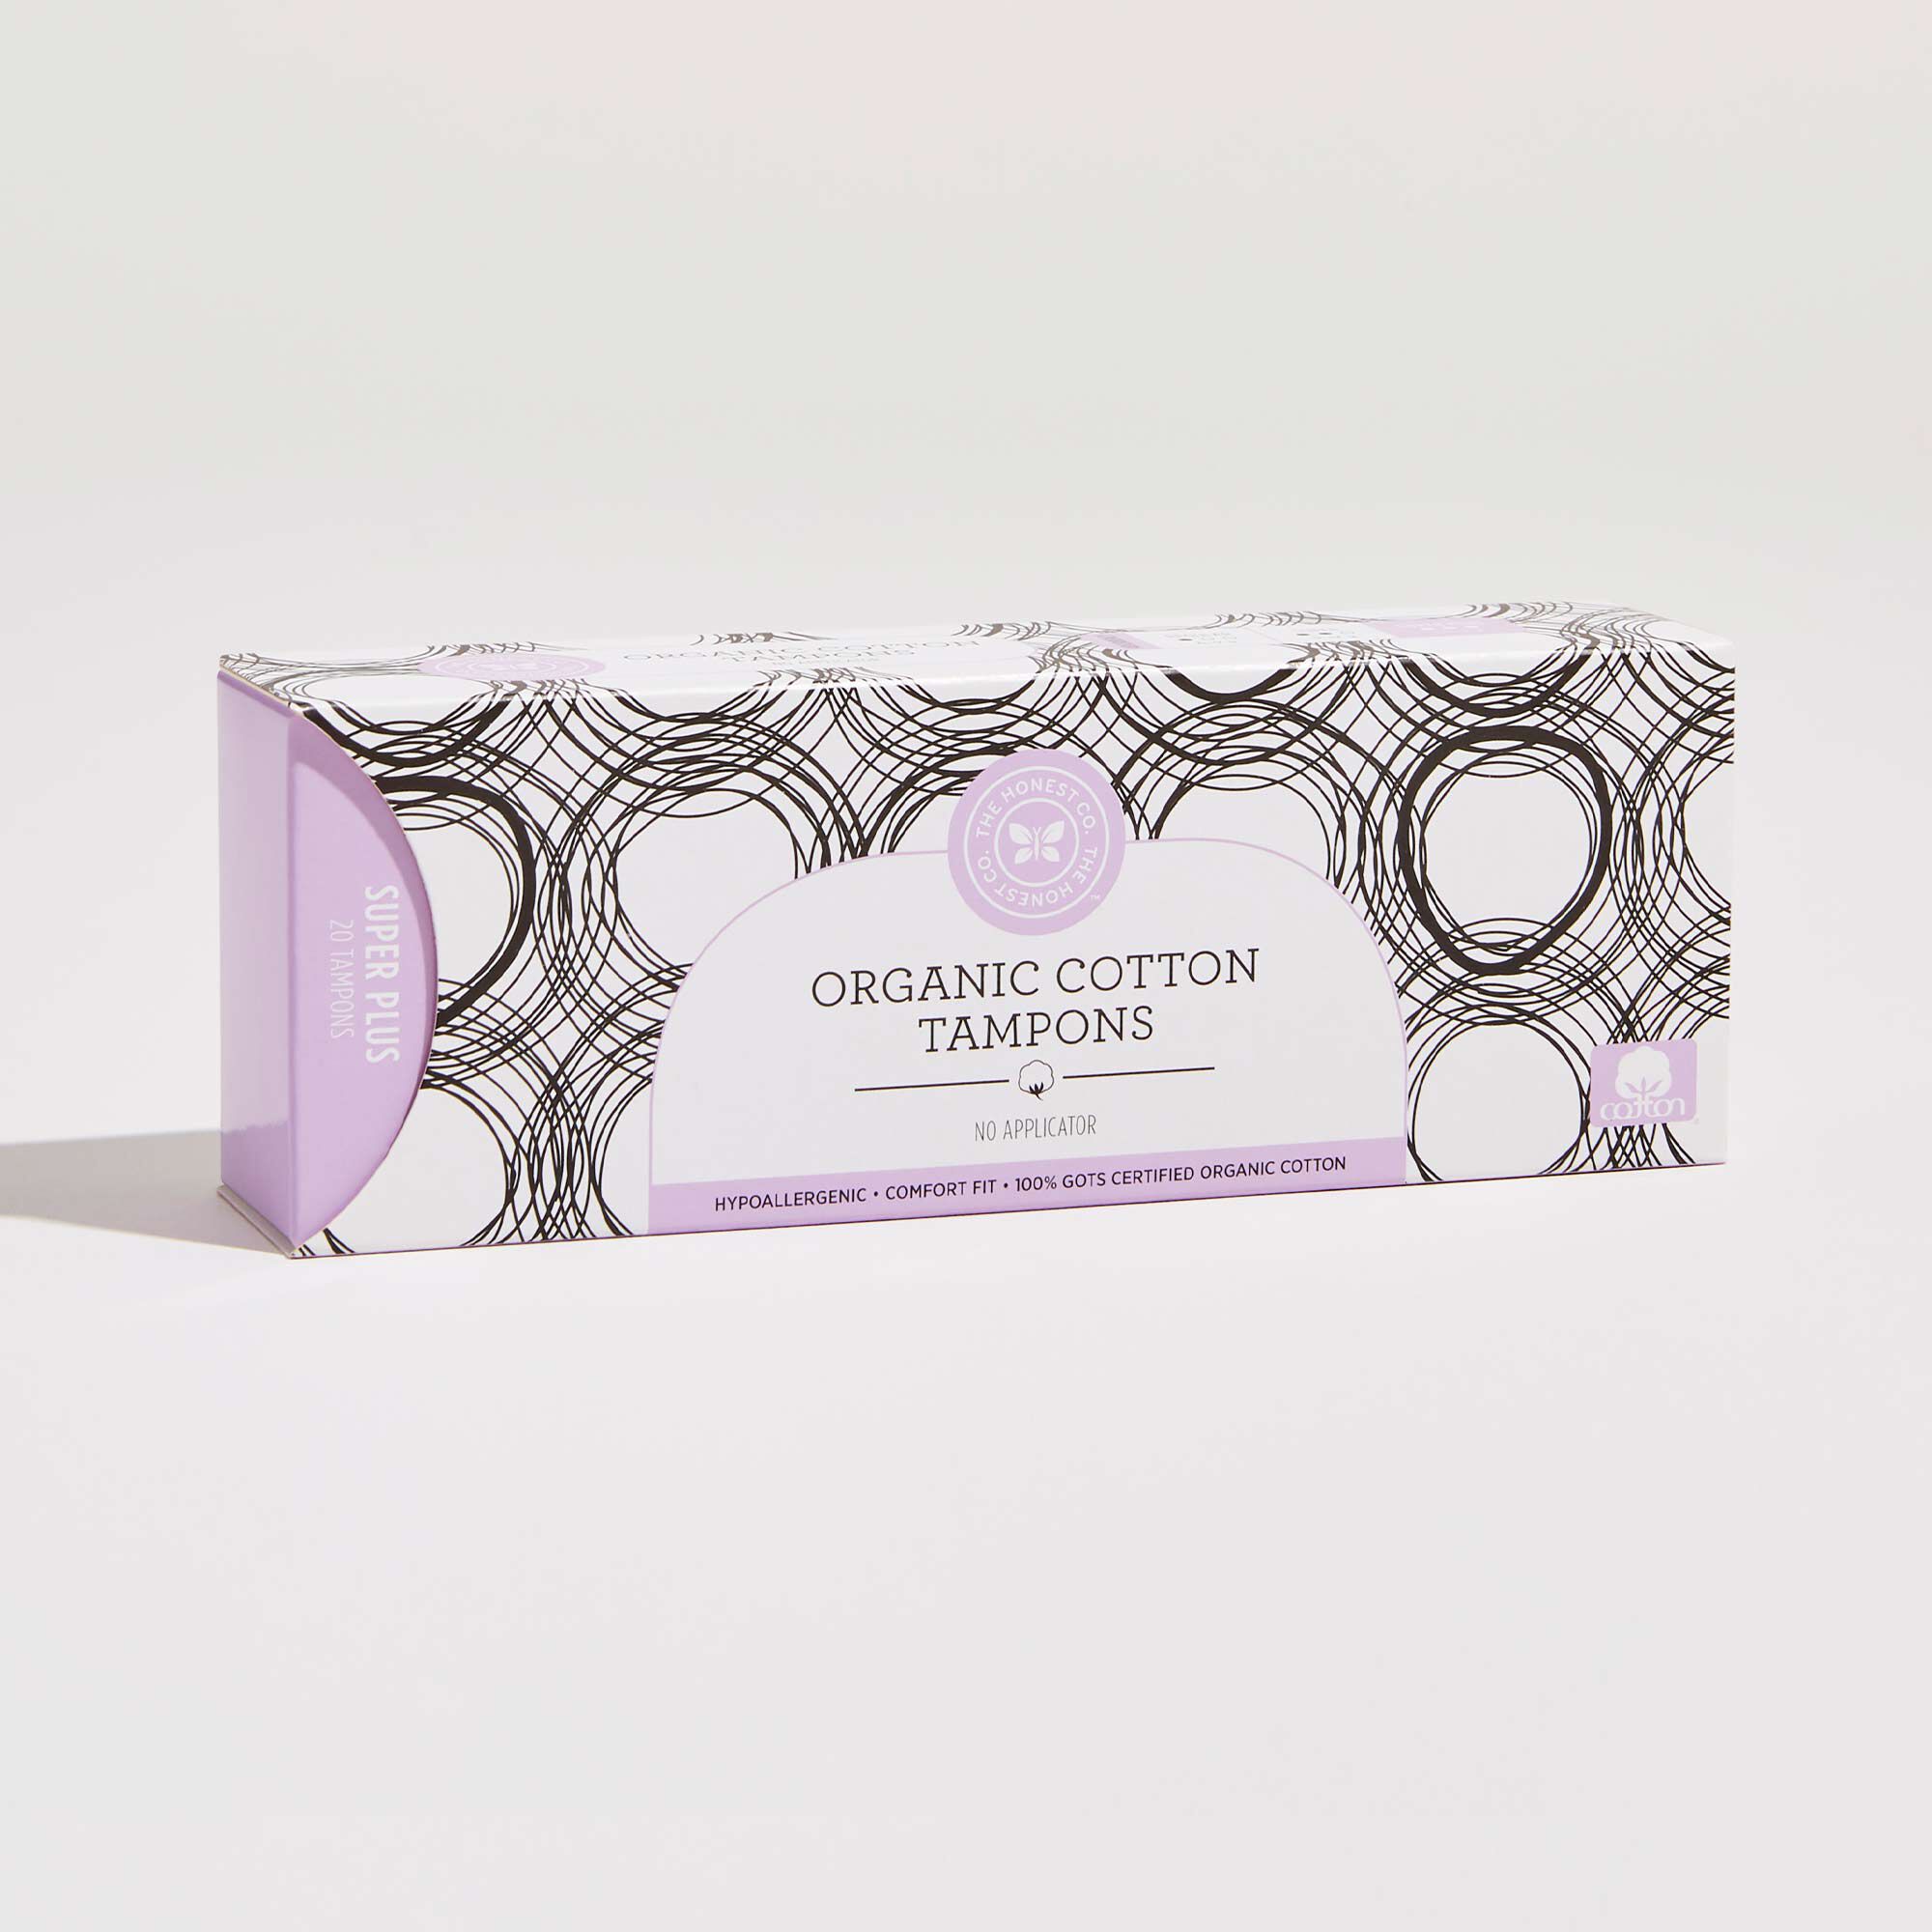 Super Plus Tampons with No Applicator in a Purple Box